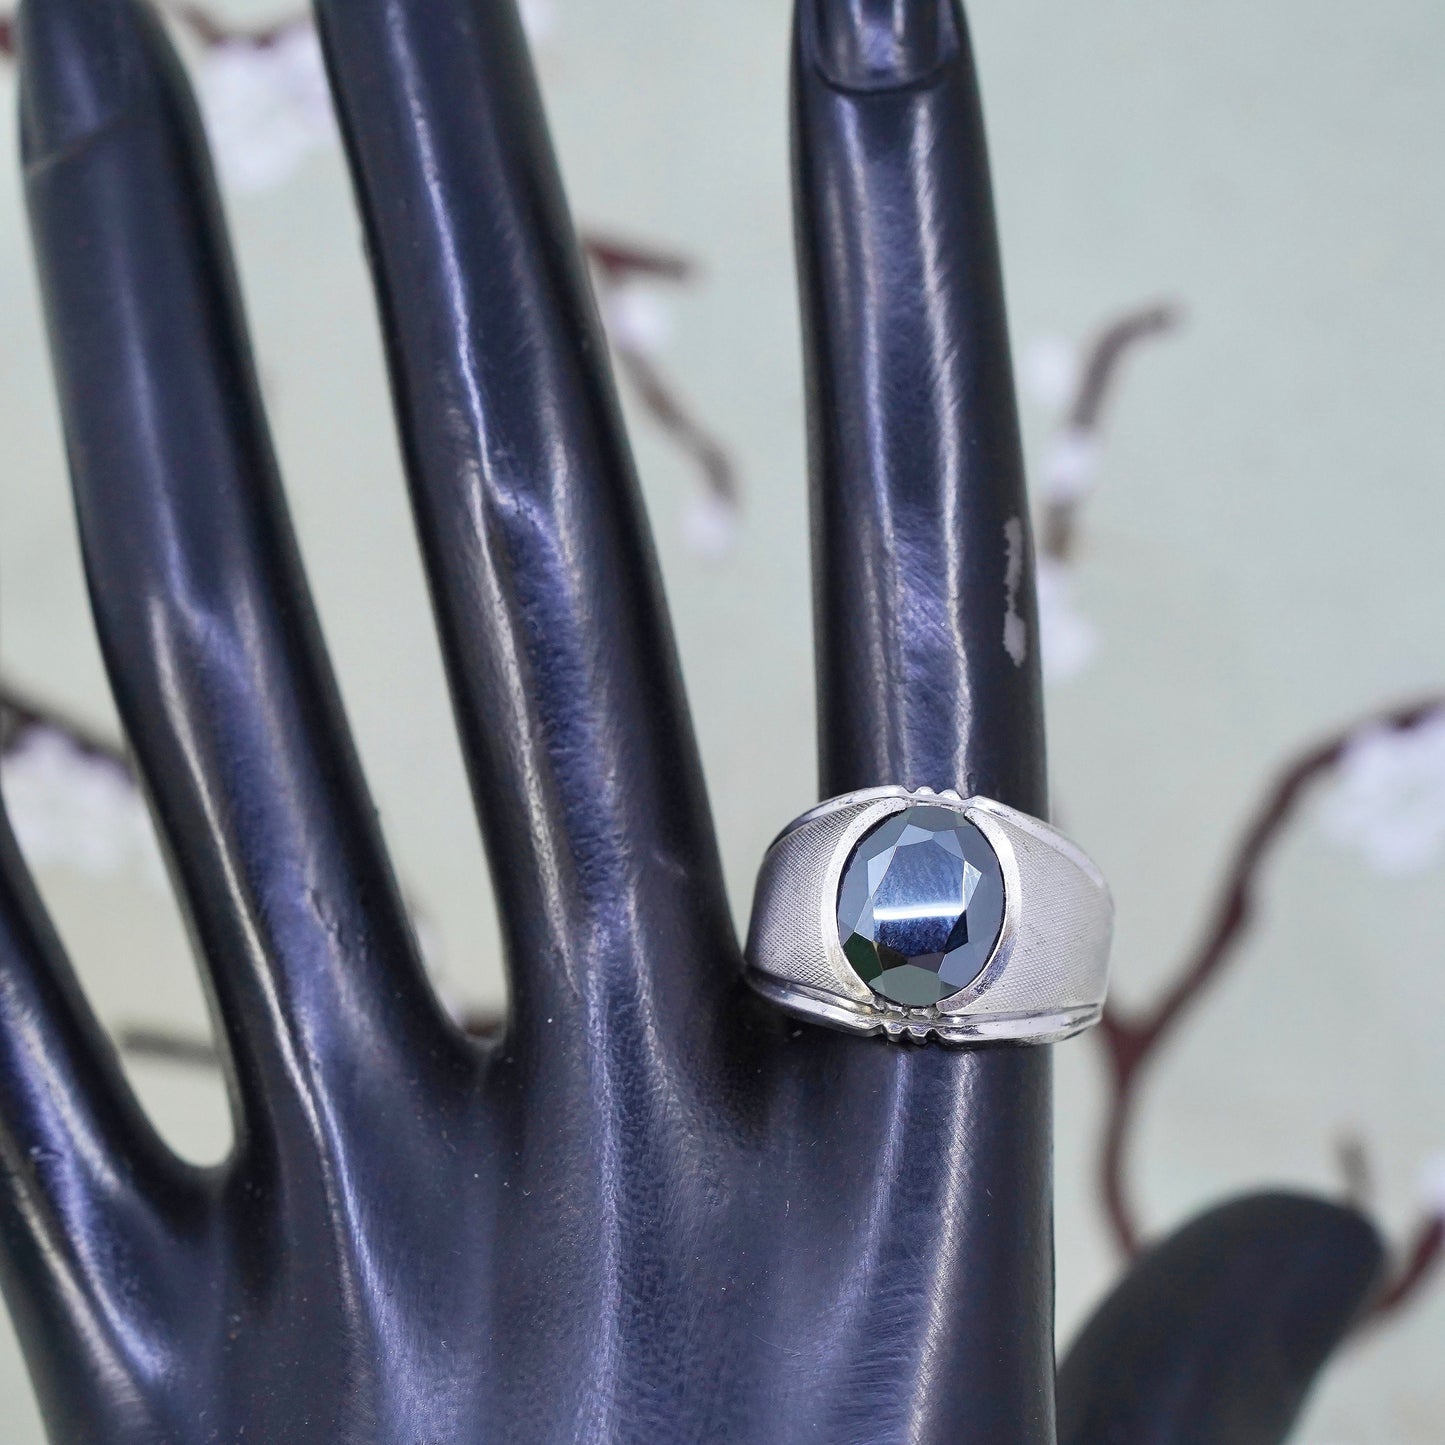 Size 8.5, vintage sterling 925 silver handmade ring, with oval hematite